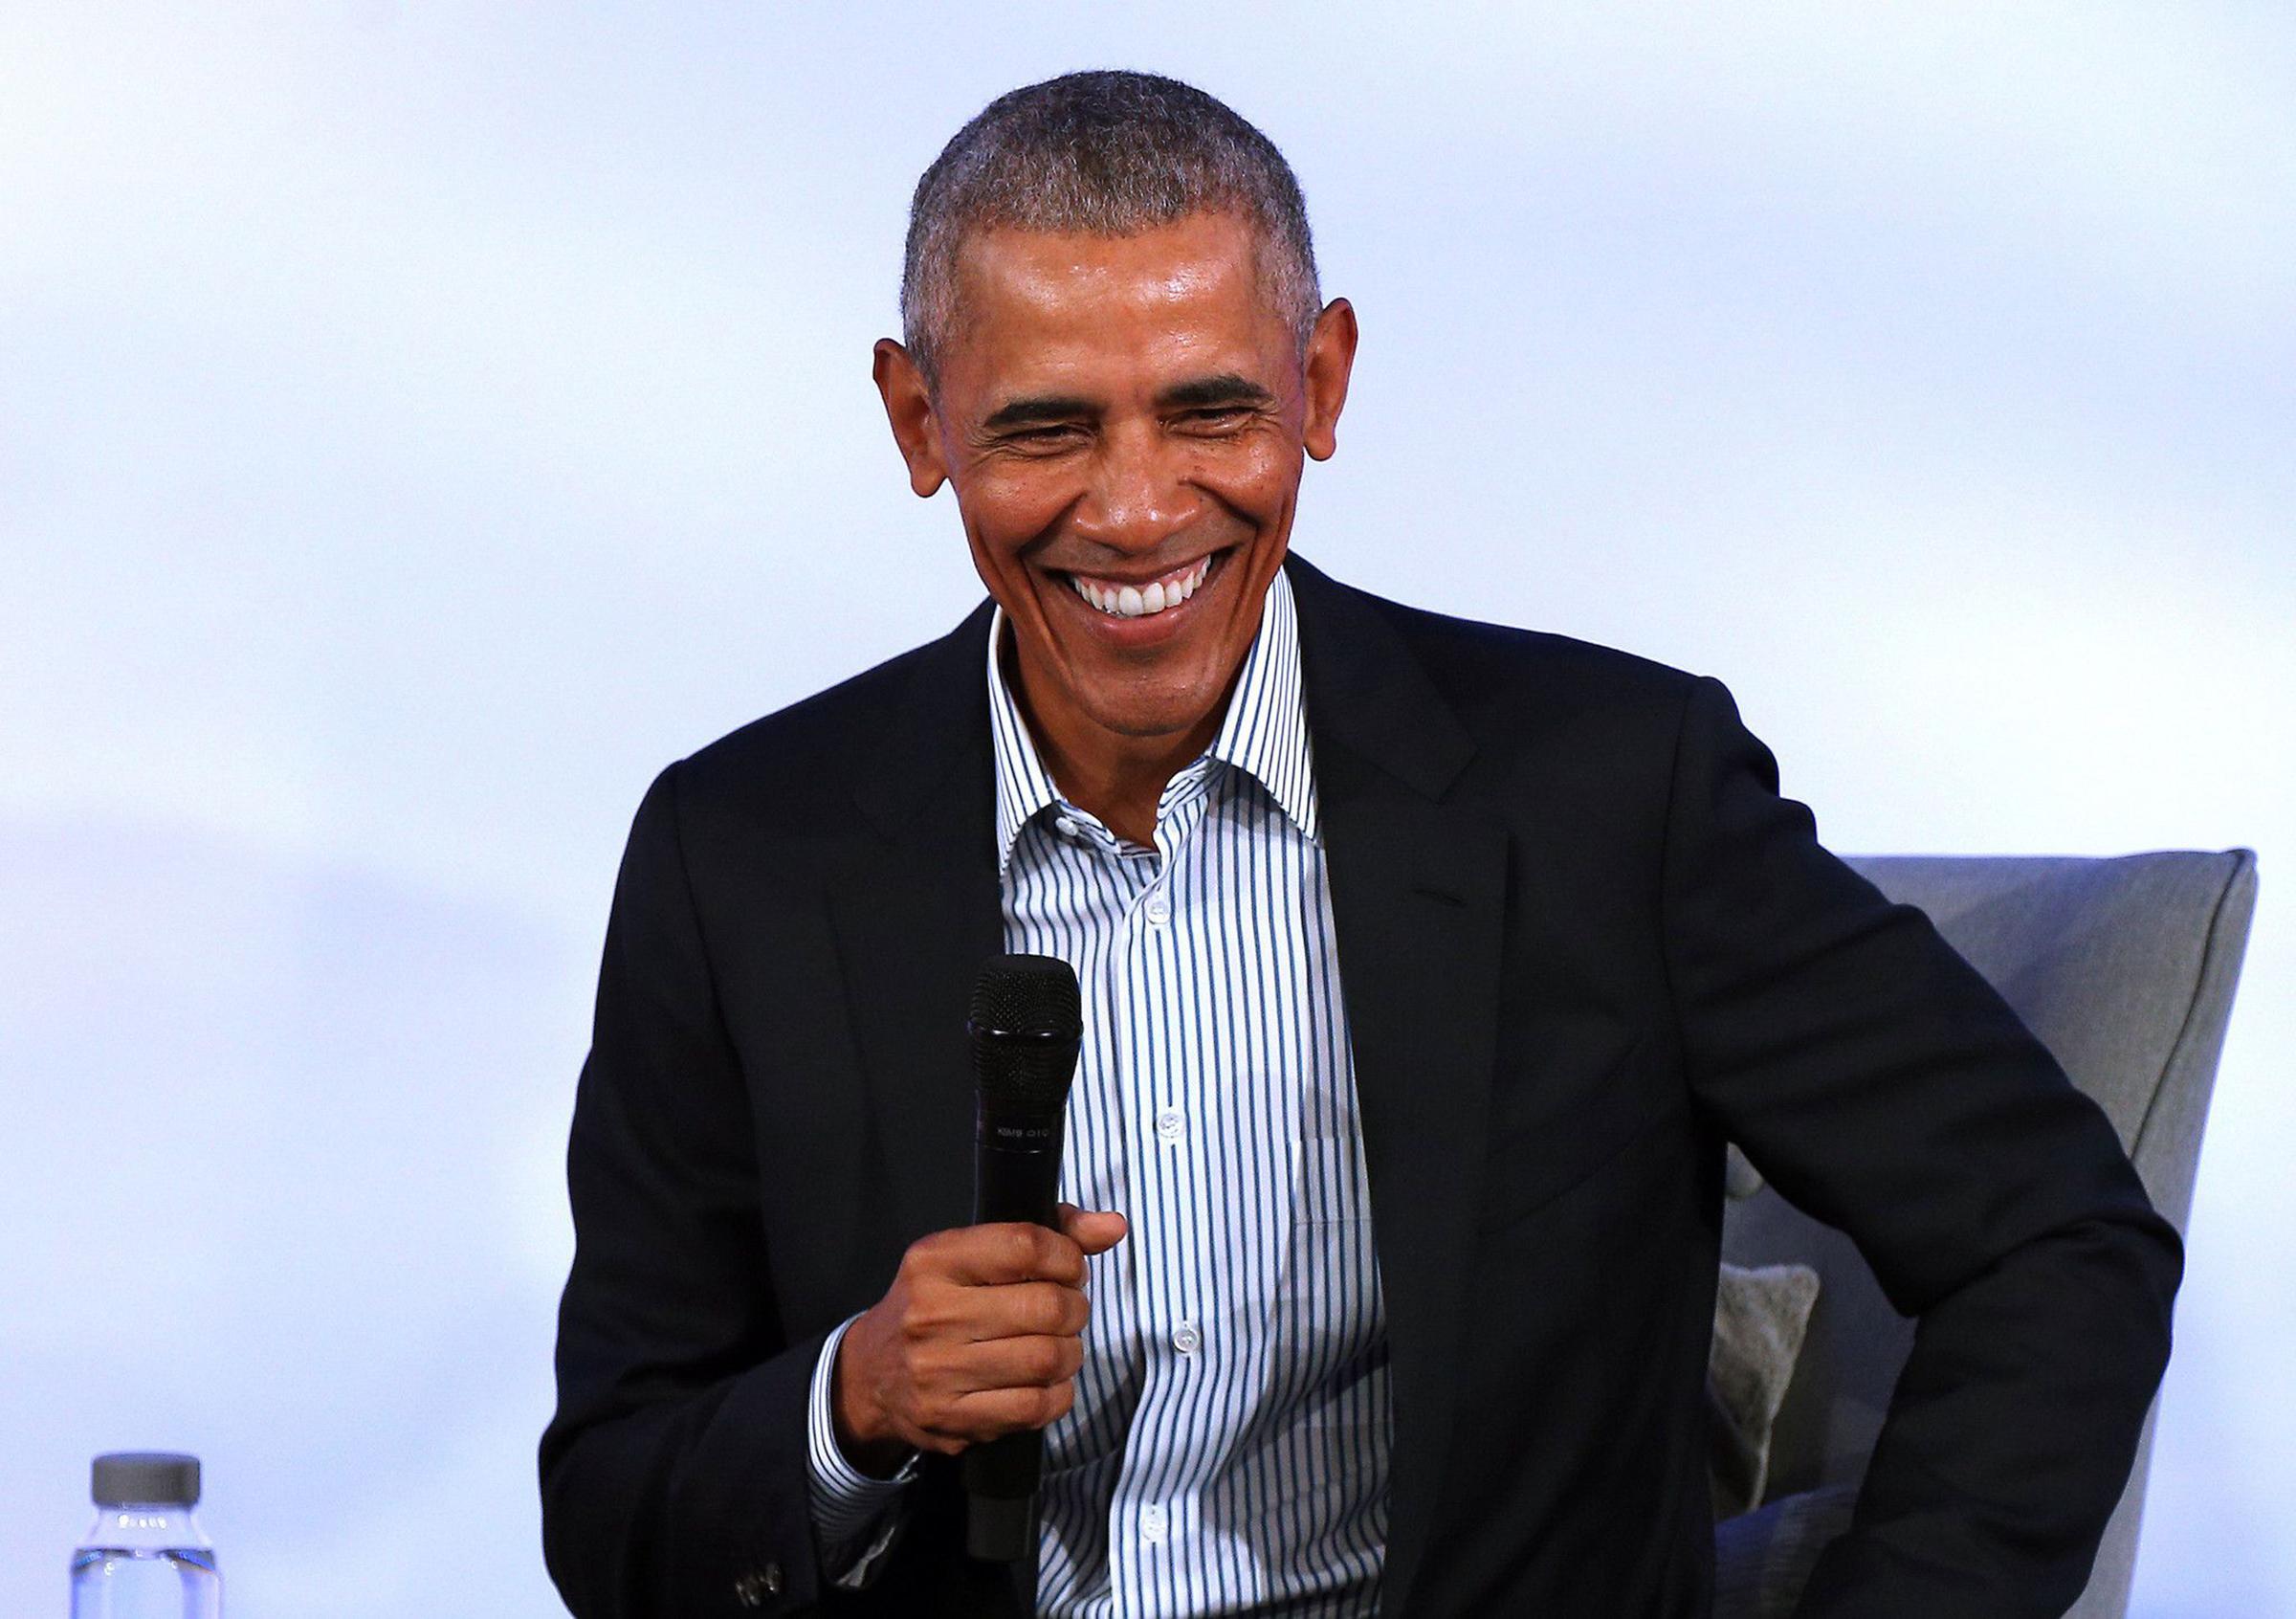 Barack Obama speaks during the closing session of the 2019 Obama Foundation Summit meeting